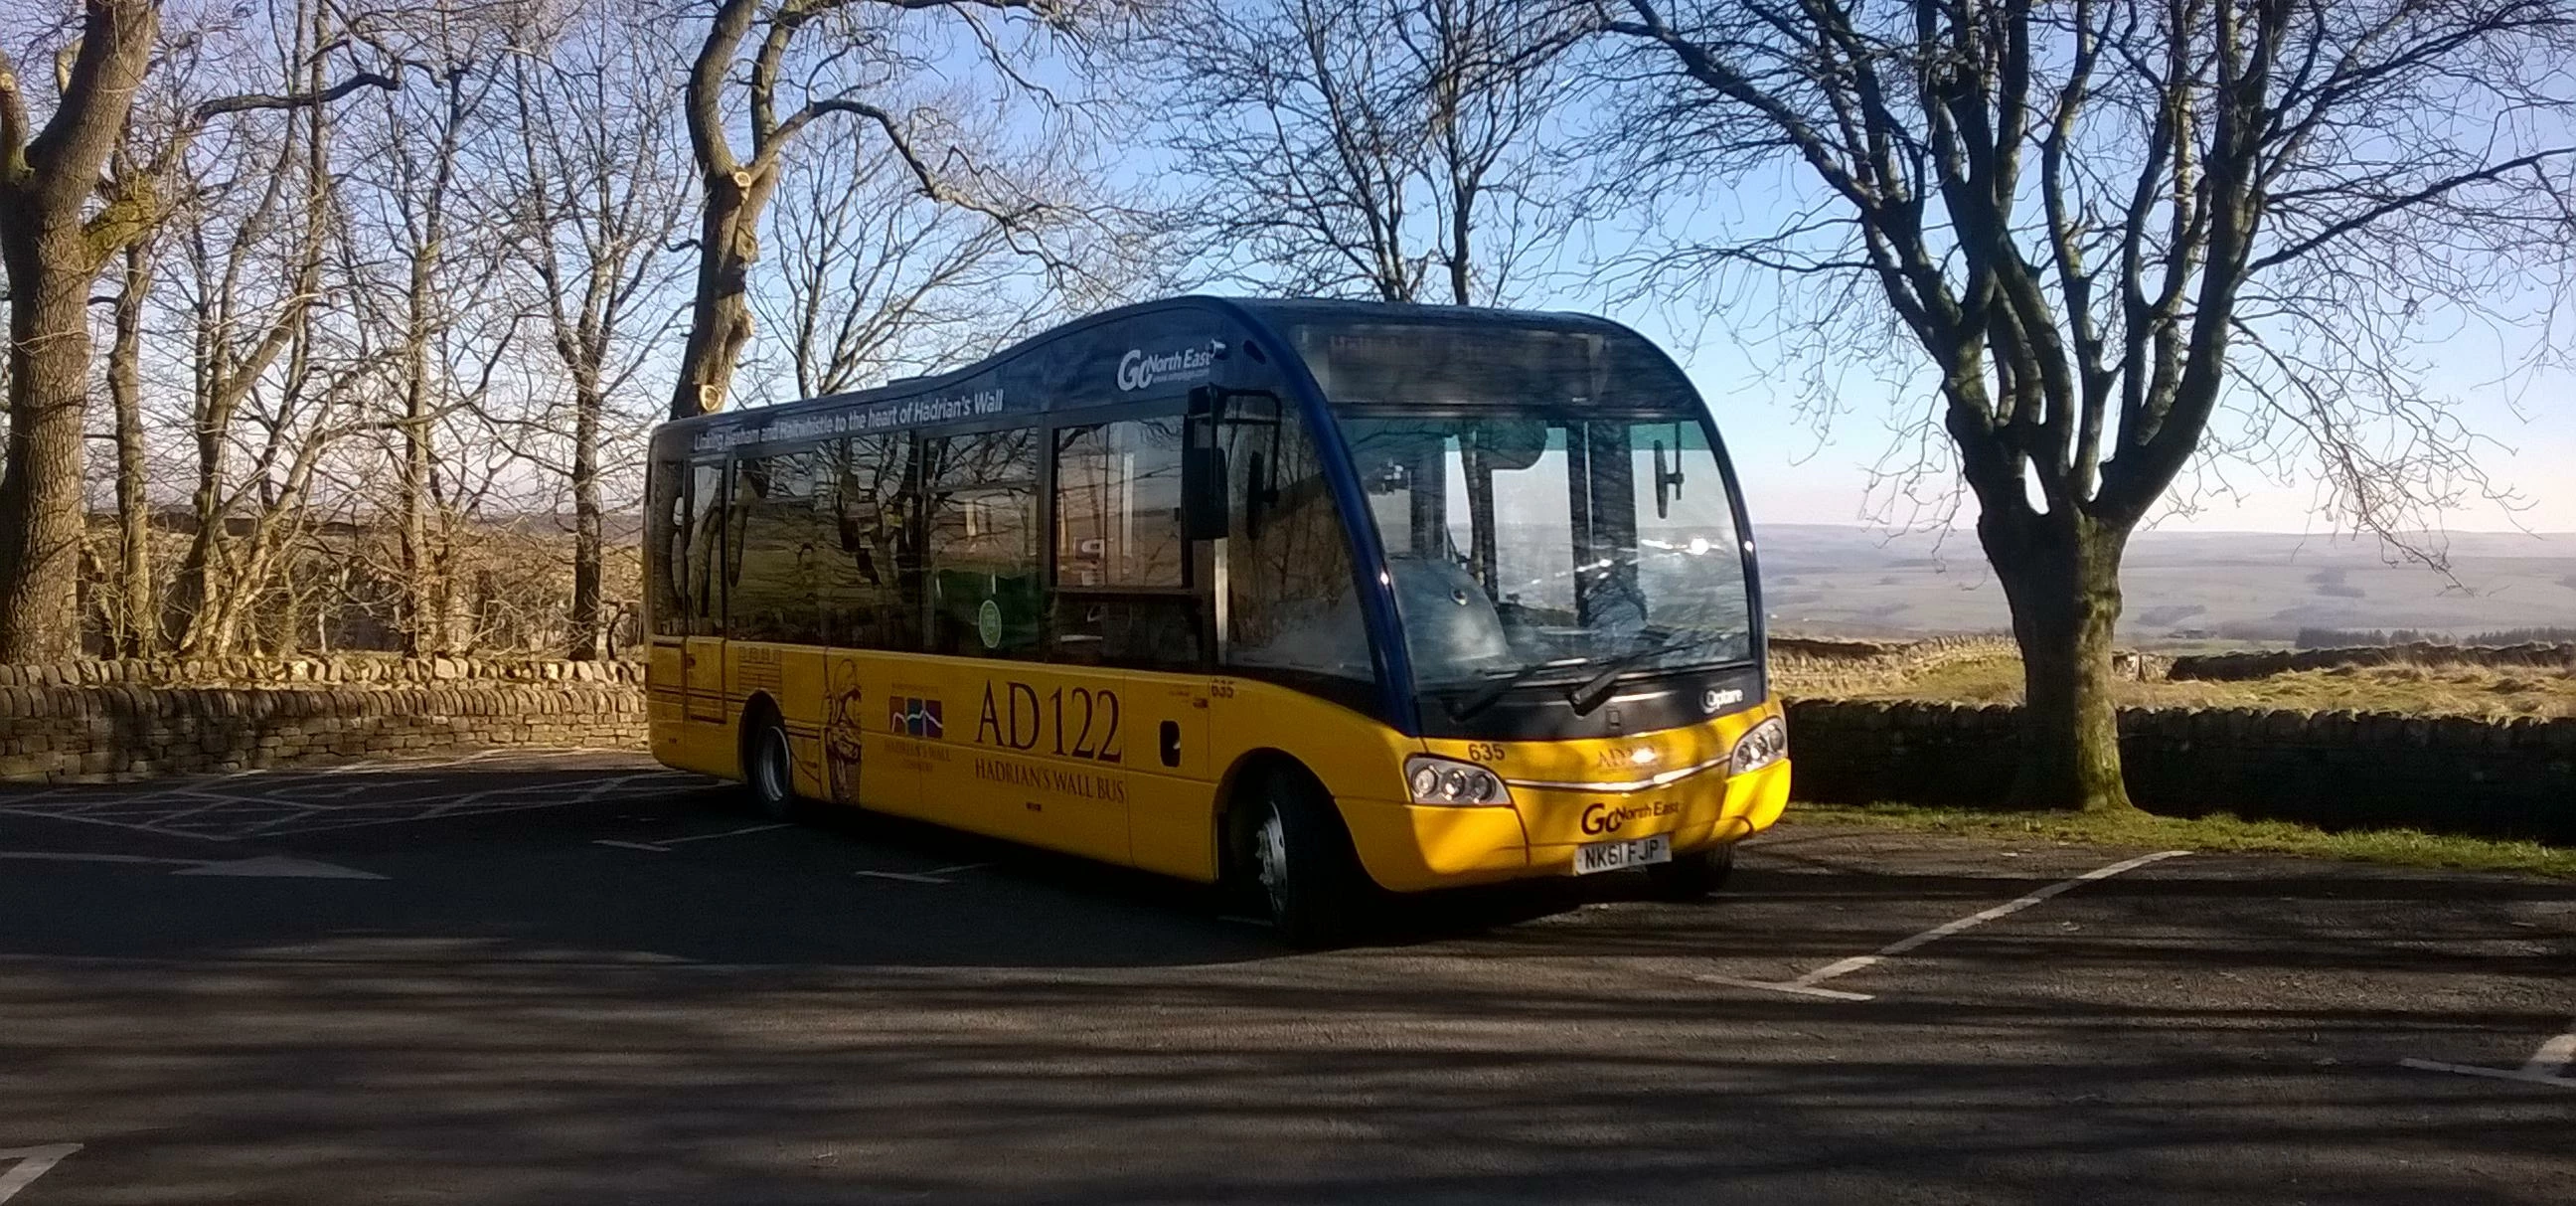 Go North East's AD122 Bus